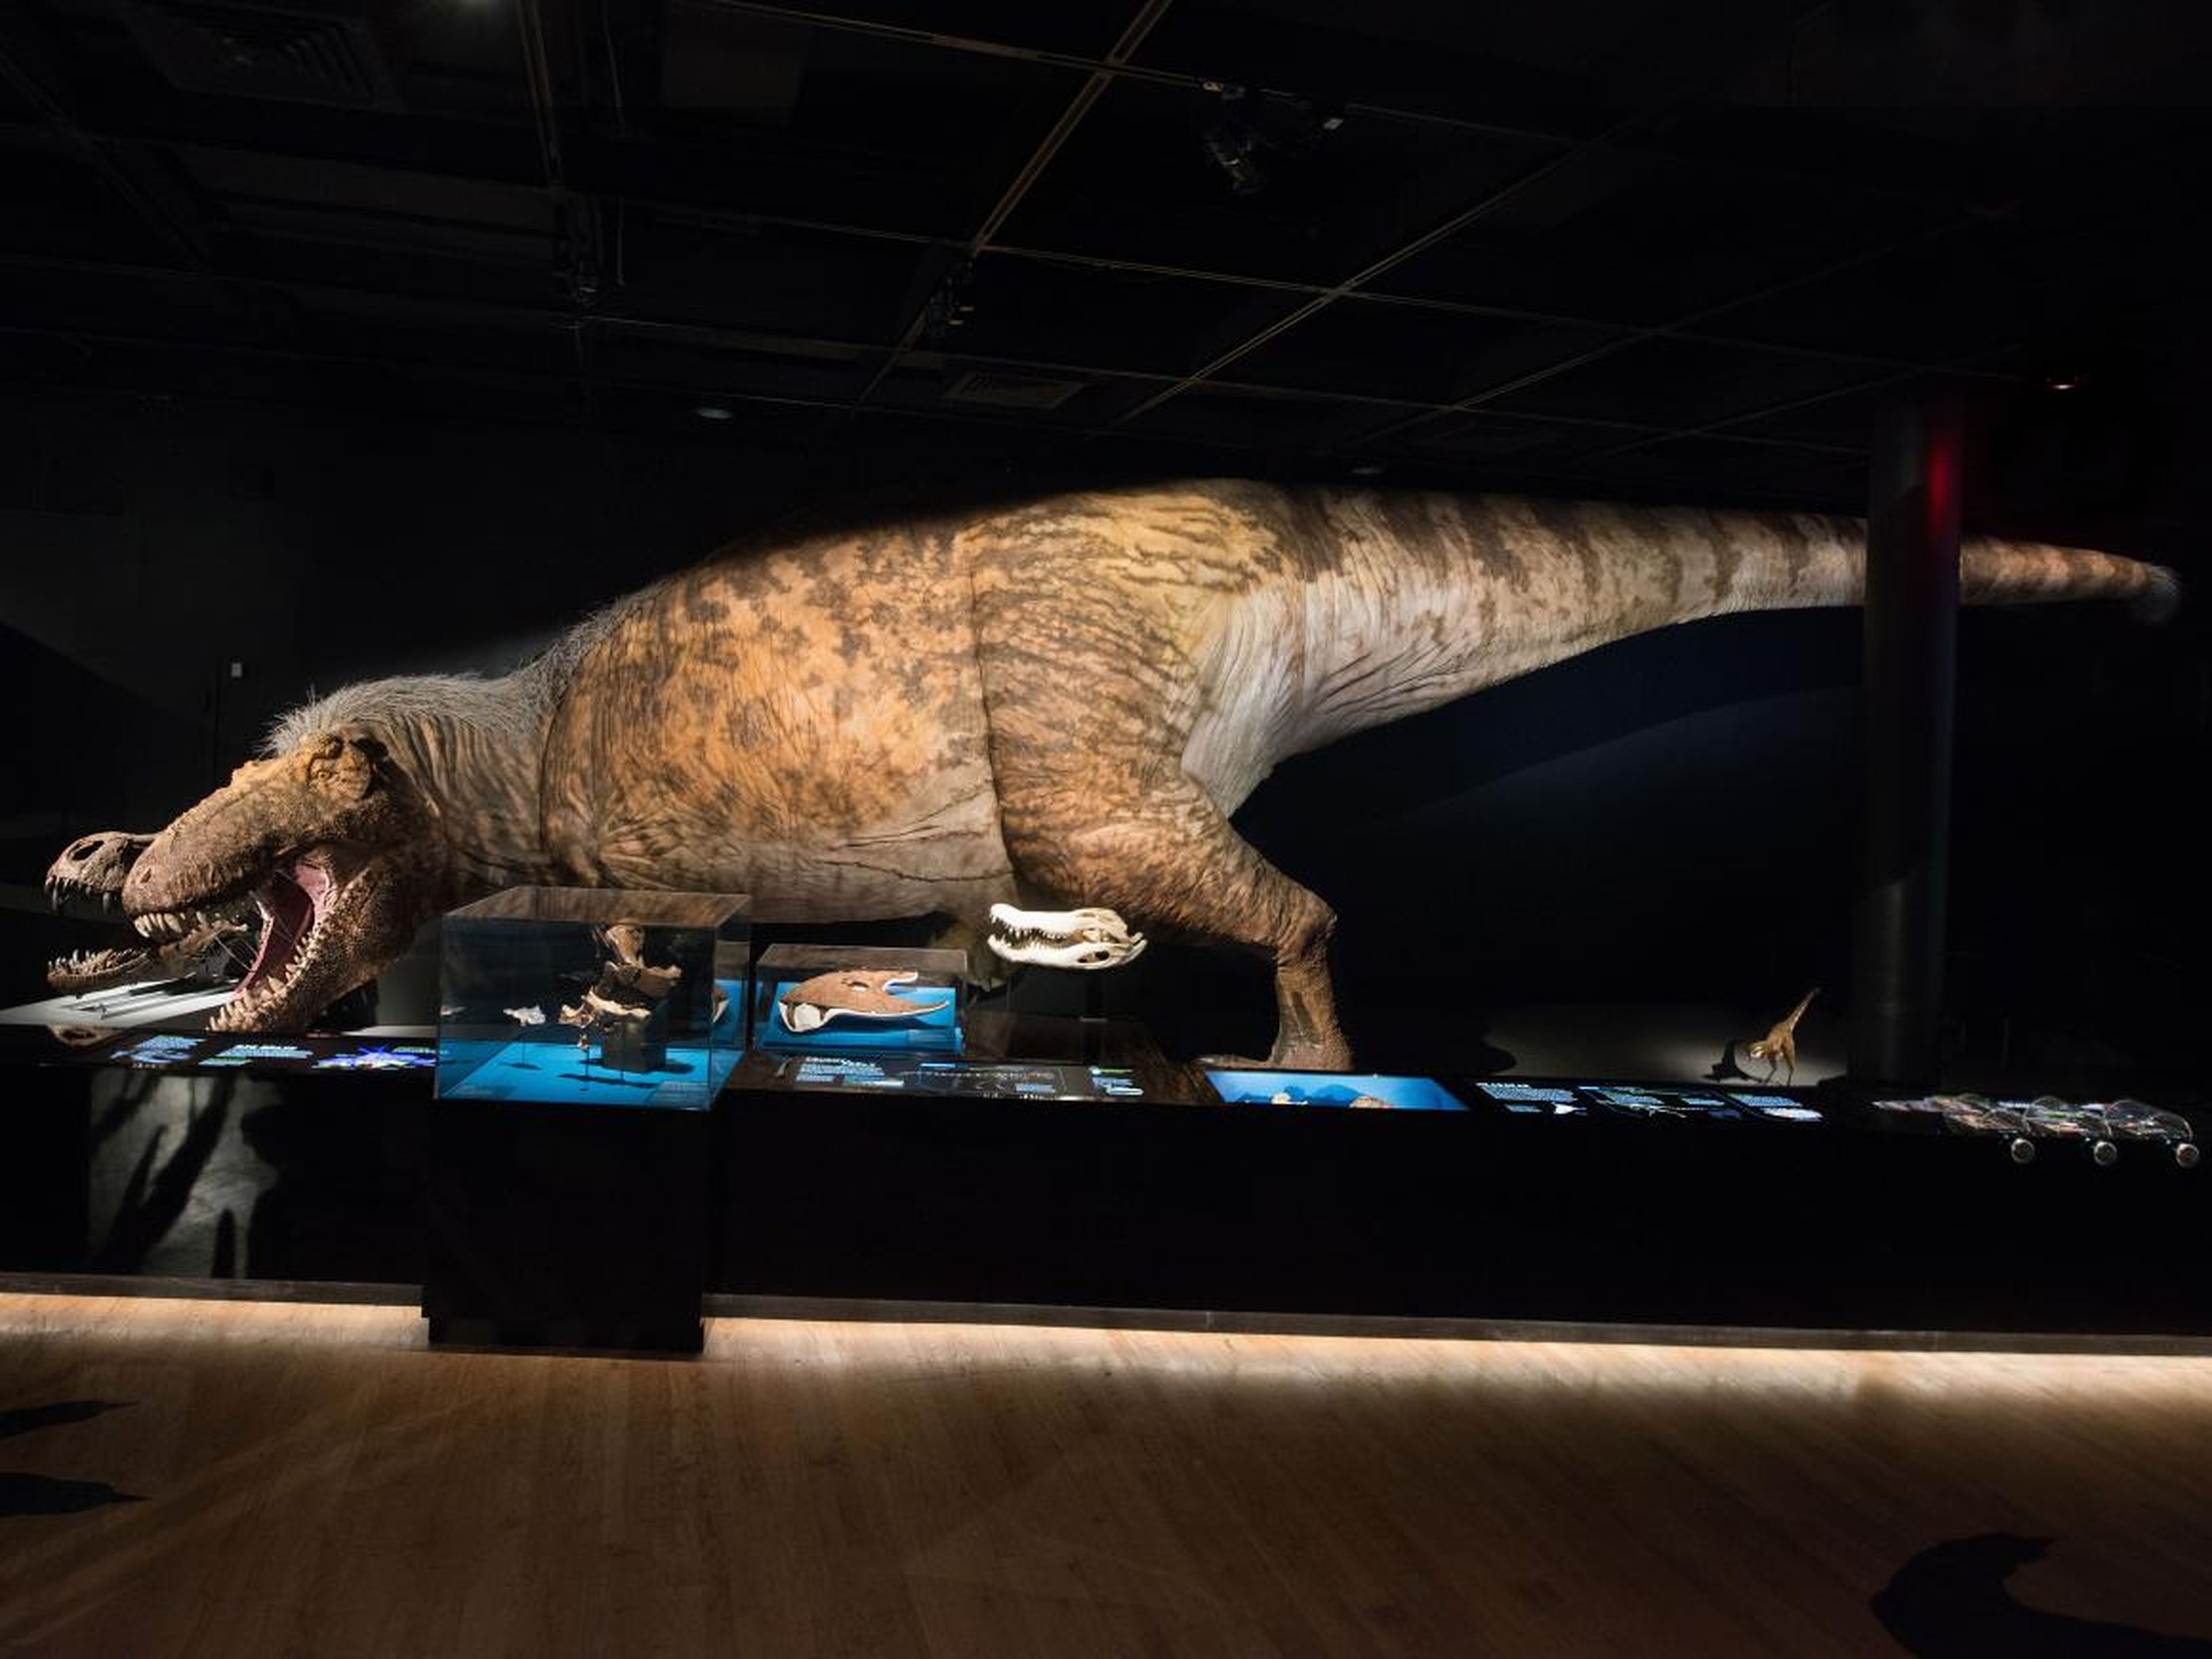 A T. rex grew from a tiny hatchling to a 9-ton predator in about 18 to 20 years, gaining an unbelievable 1,700 pounds per year.